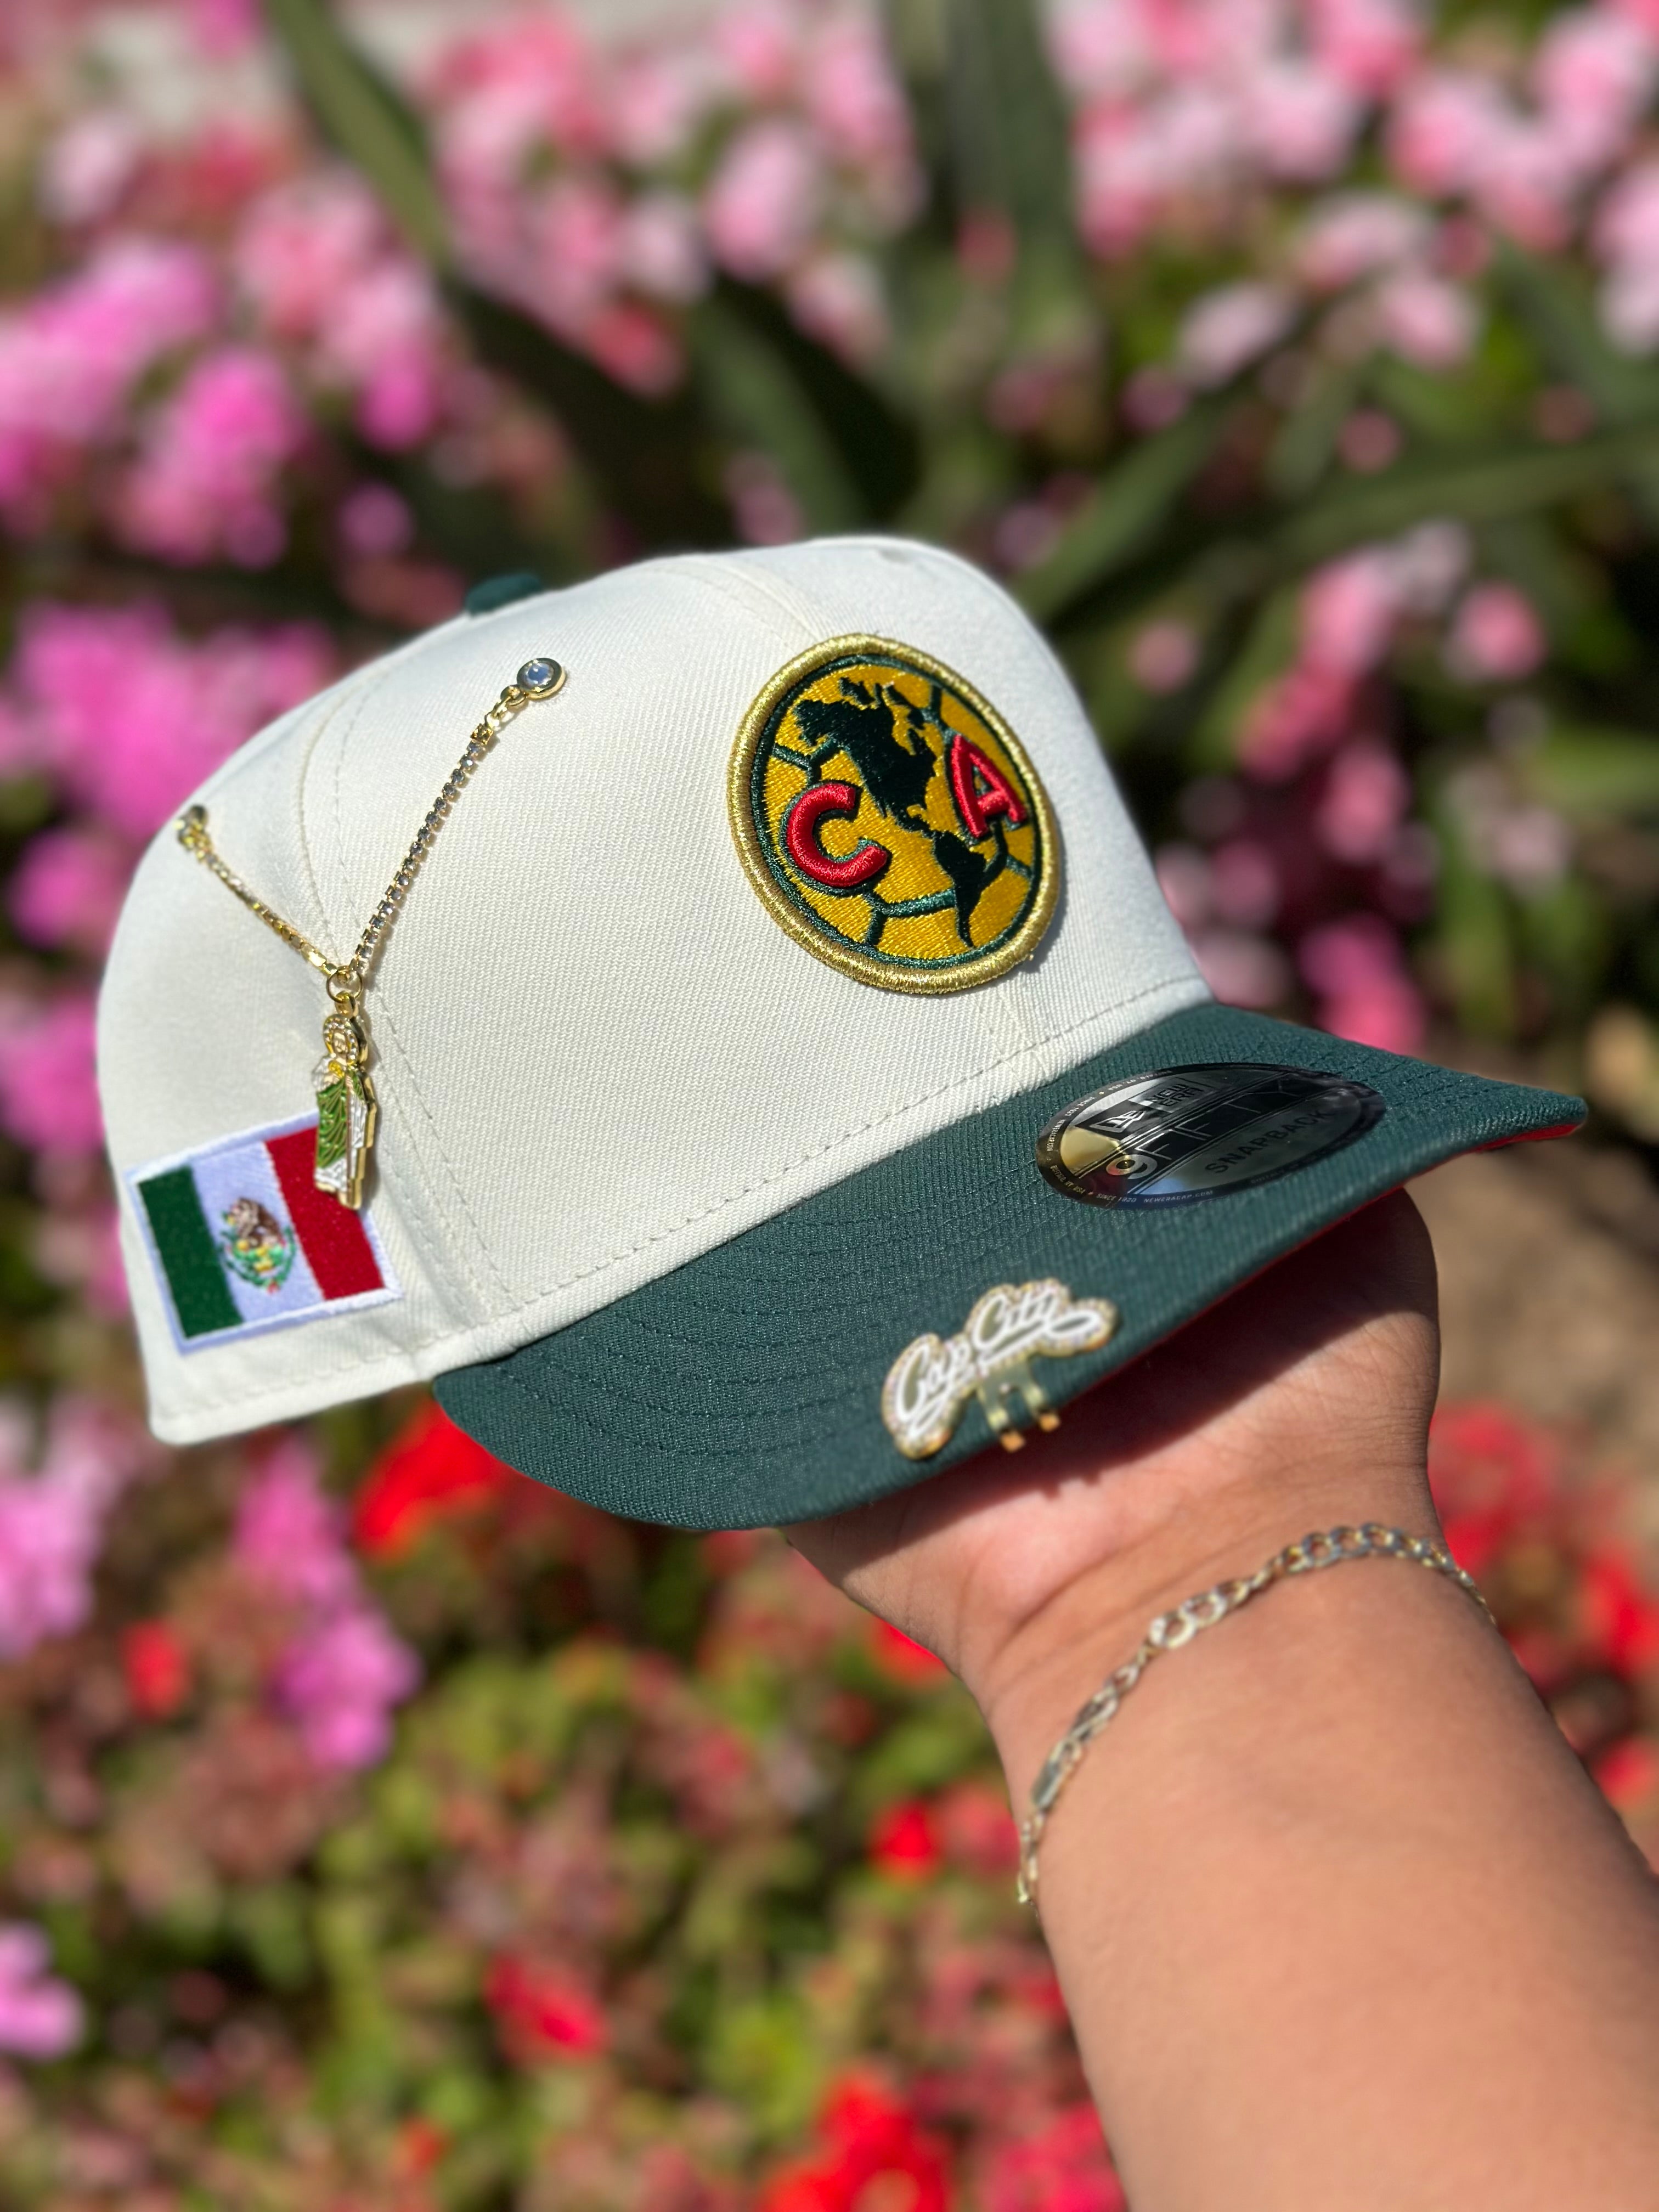 NEW ERA EXCLUSIVE 9FIFTY CHROME WHITE/GREEN "CLUB AMERICA" SNAPBACK W/MEXICO FLAG SIDE PATCH